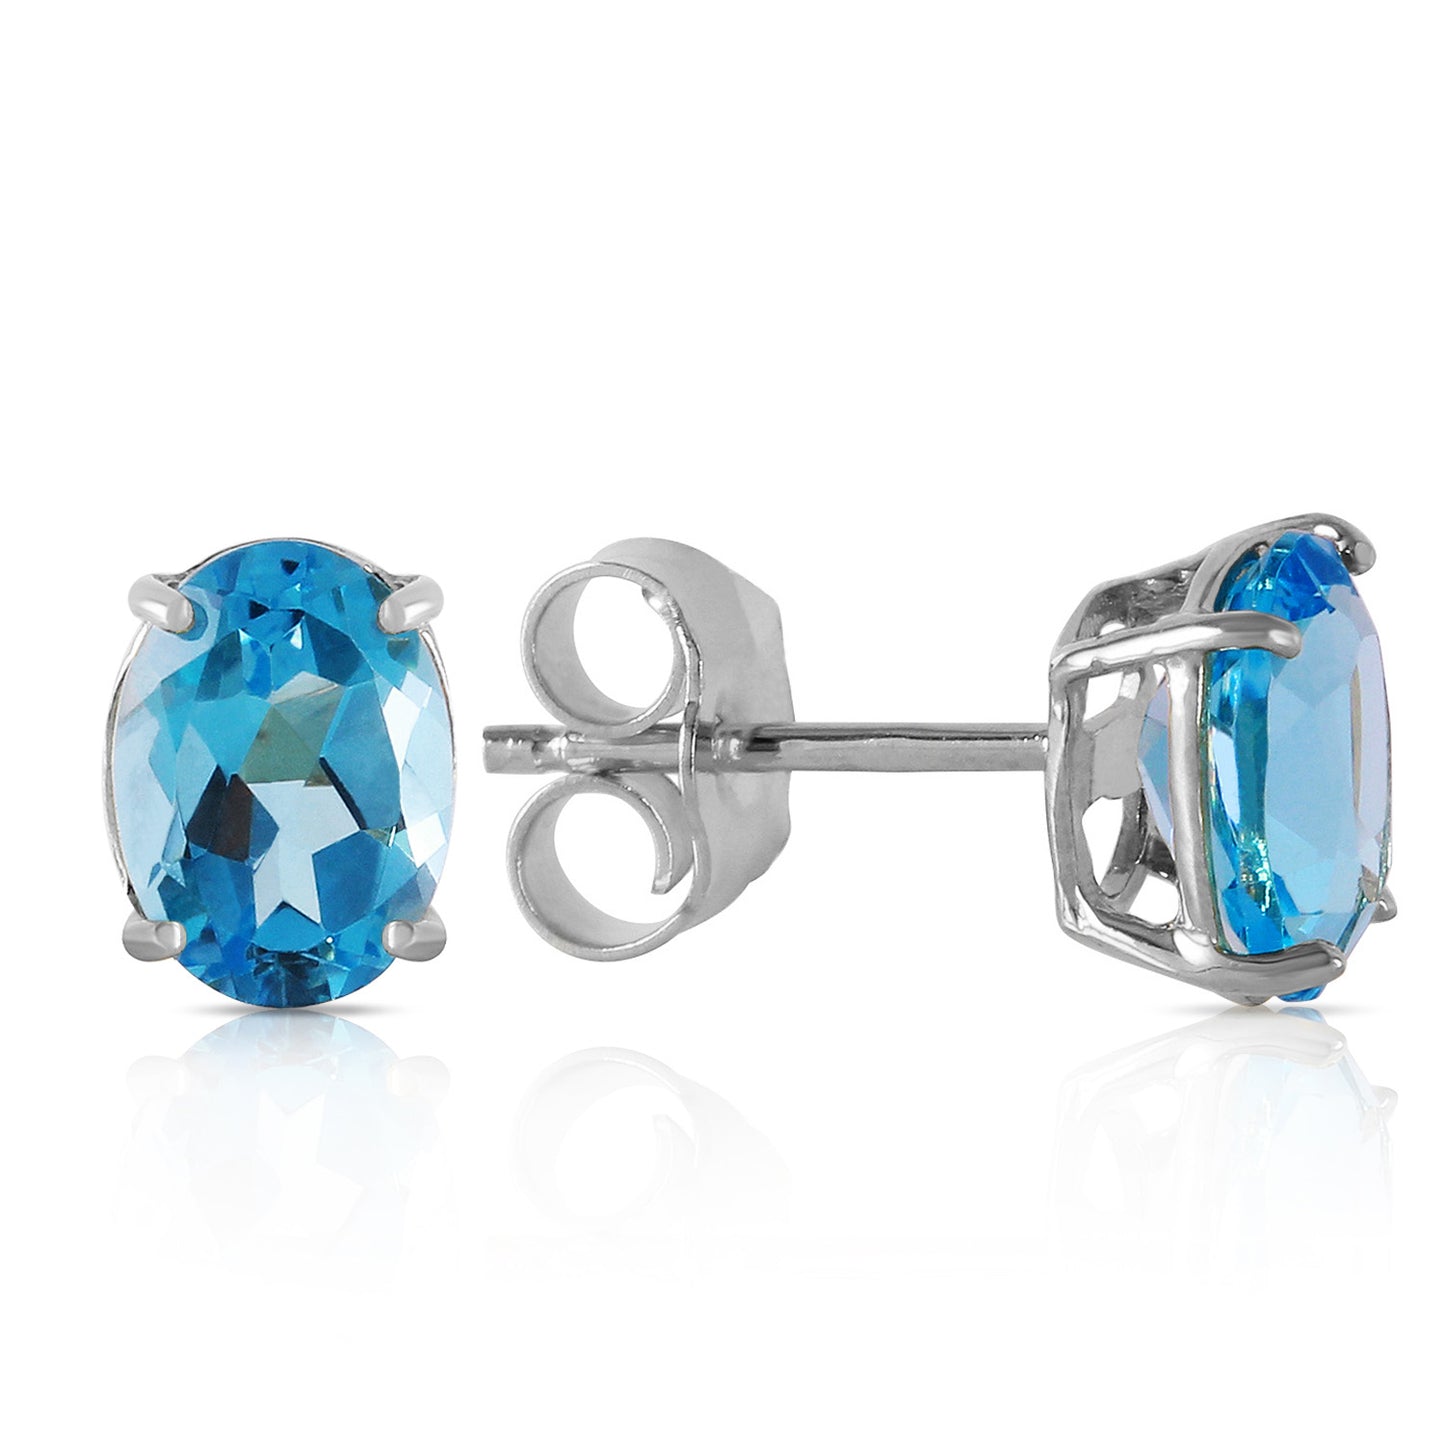 1.8 Carat 14K Solid Gold Will Sing For You Blue Topaz Earrings